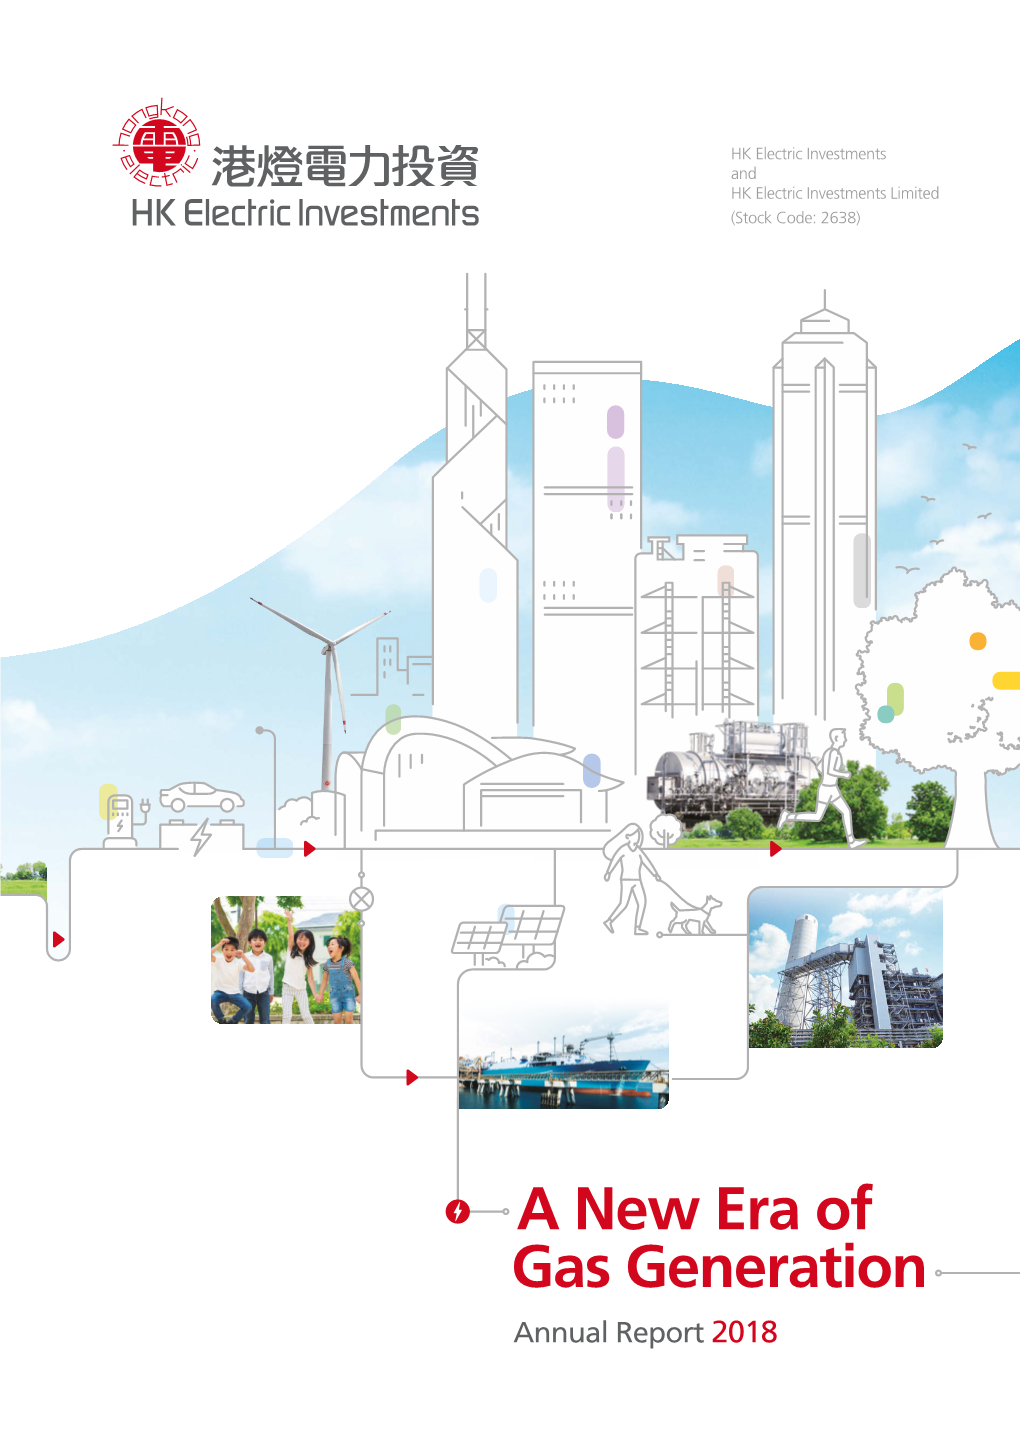 Annual Report 2018 a New Era of Gas Generation